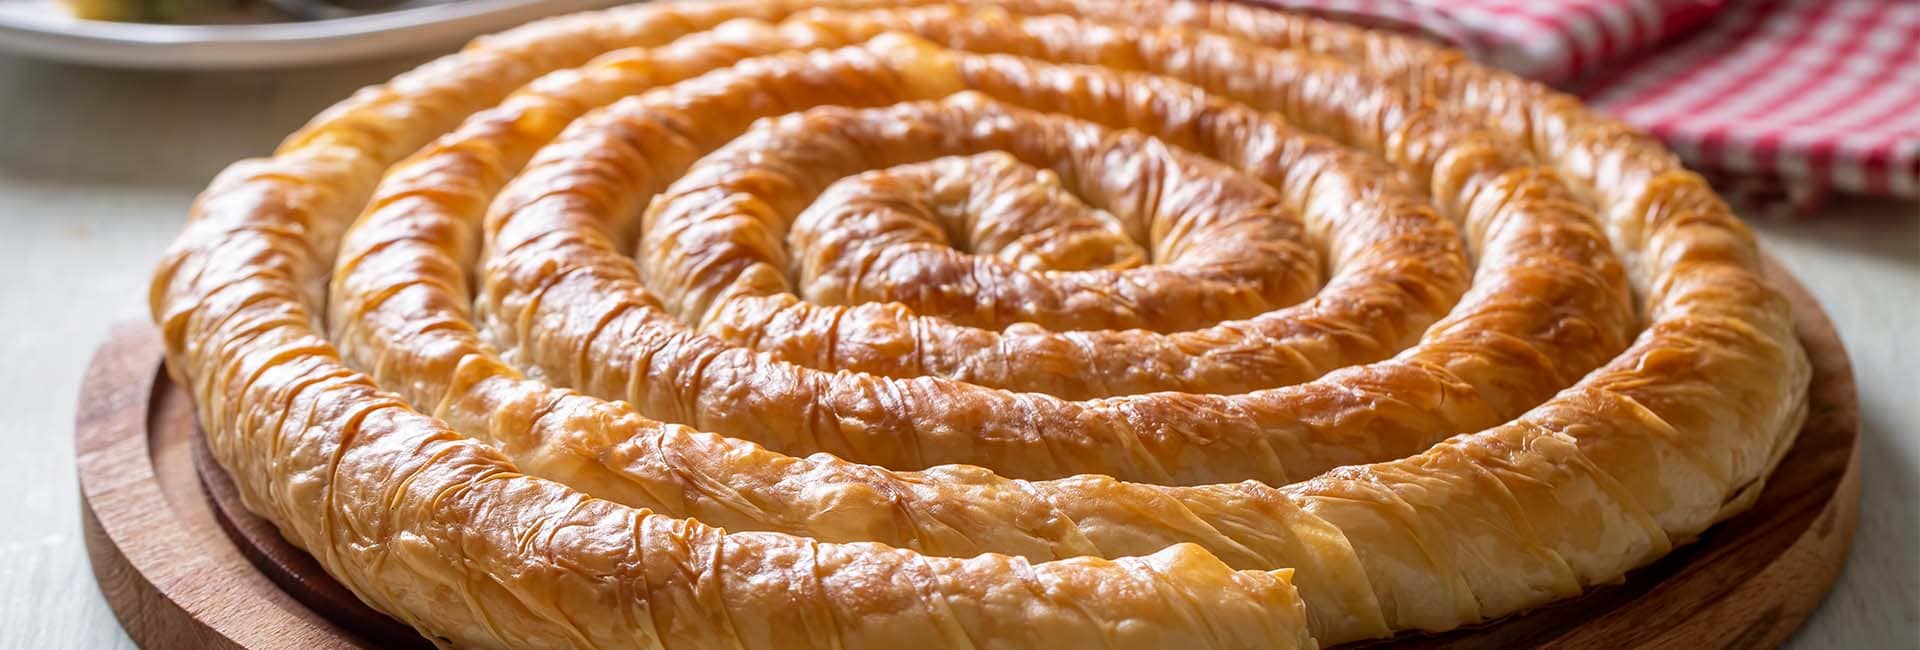 5 Easy and Tasty Börek Recipes to Try at Home